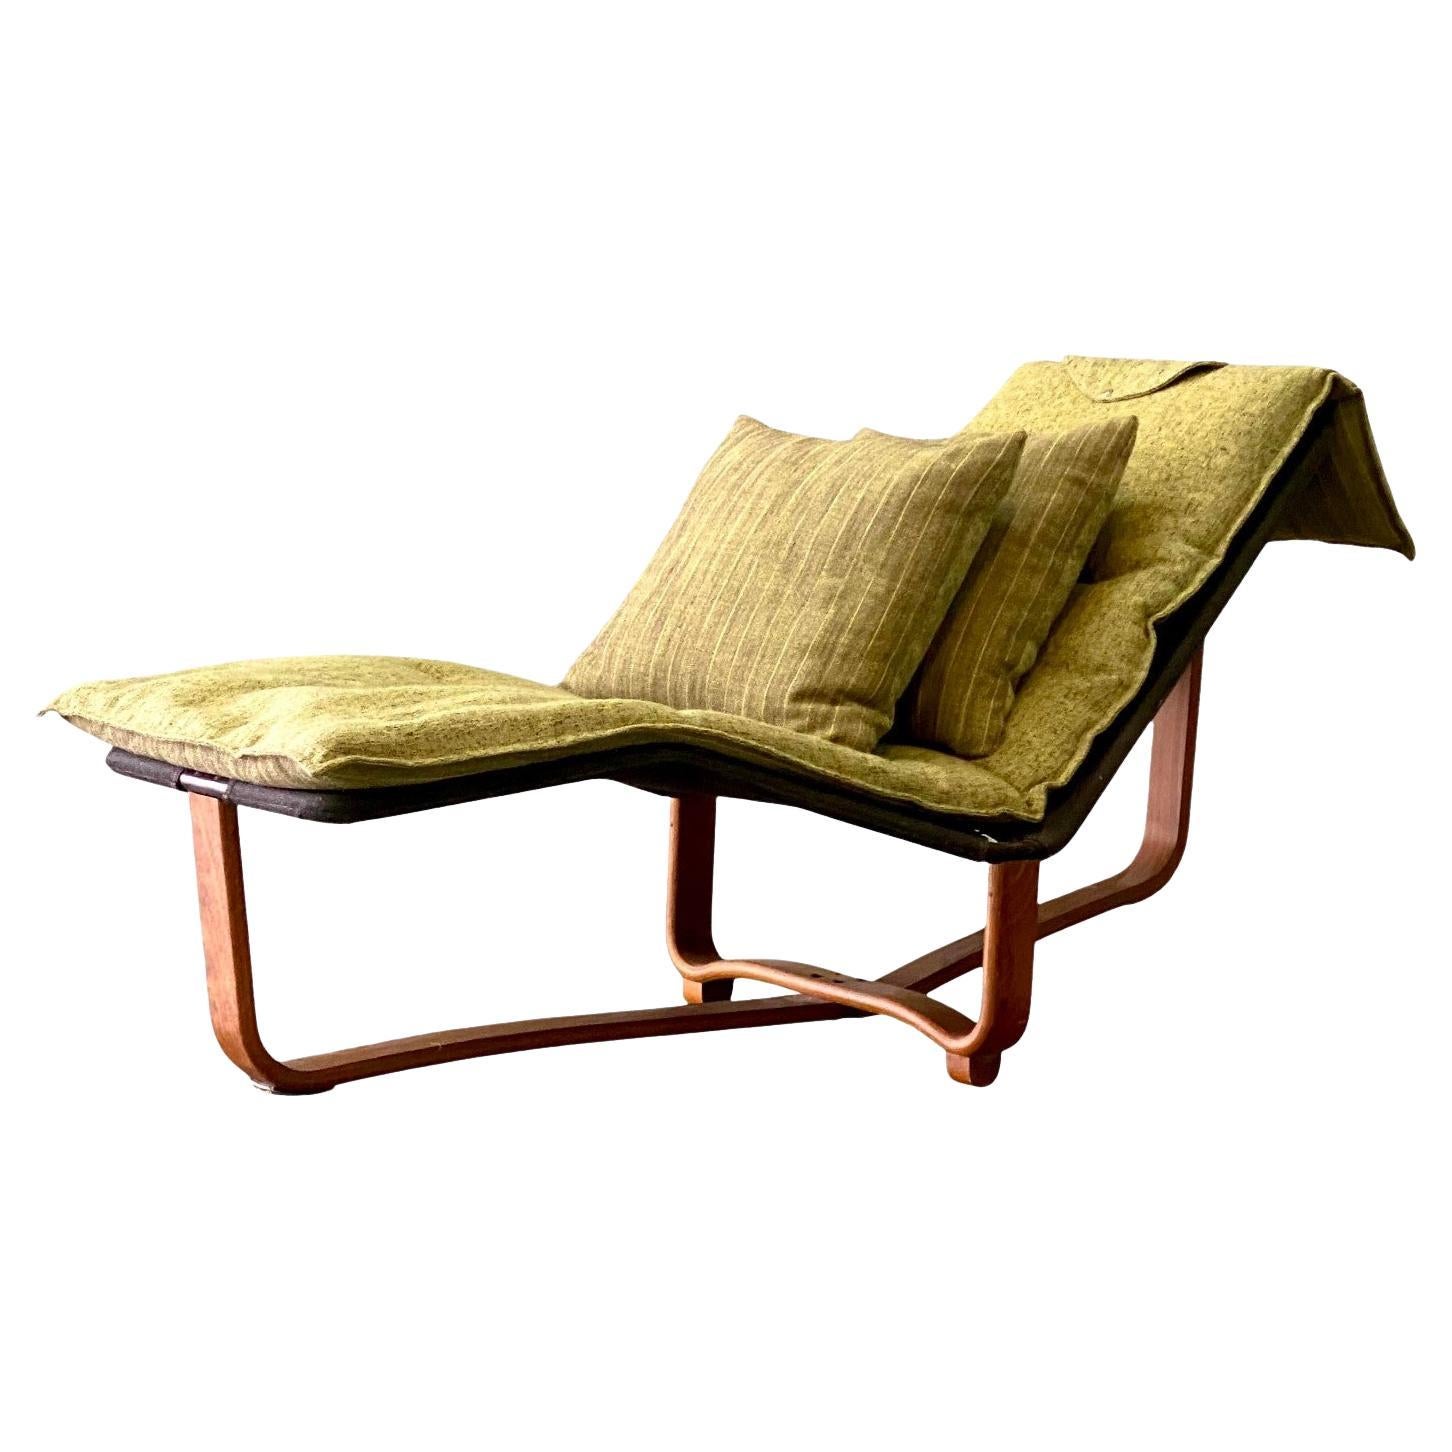 Midcentury Ingmar Relling for Westnofa Chaise Lounge